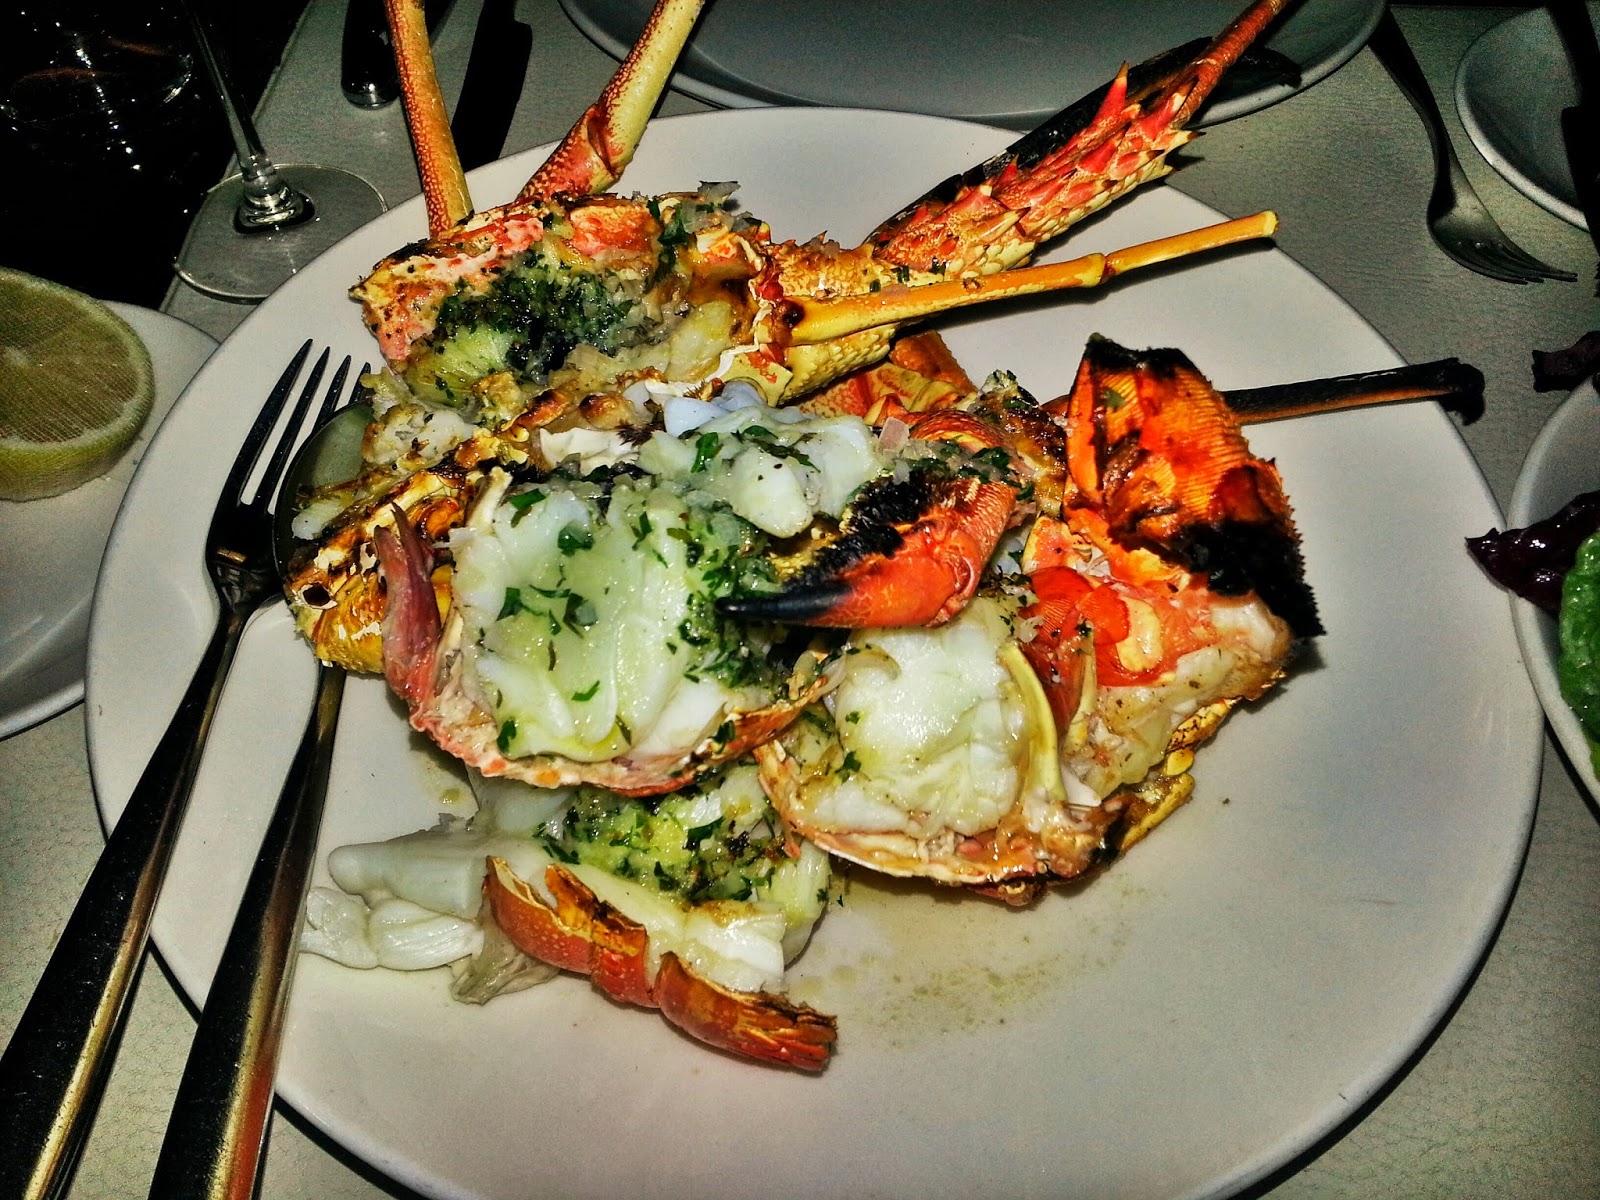 Seafood (Lobster) Dinner @ Rockpool Bar and Grill, Southbank, Melbourne CBD